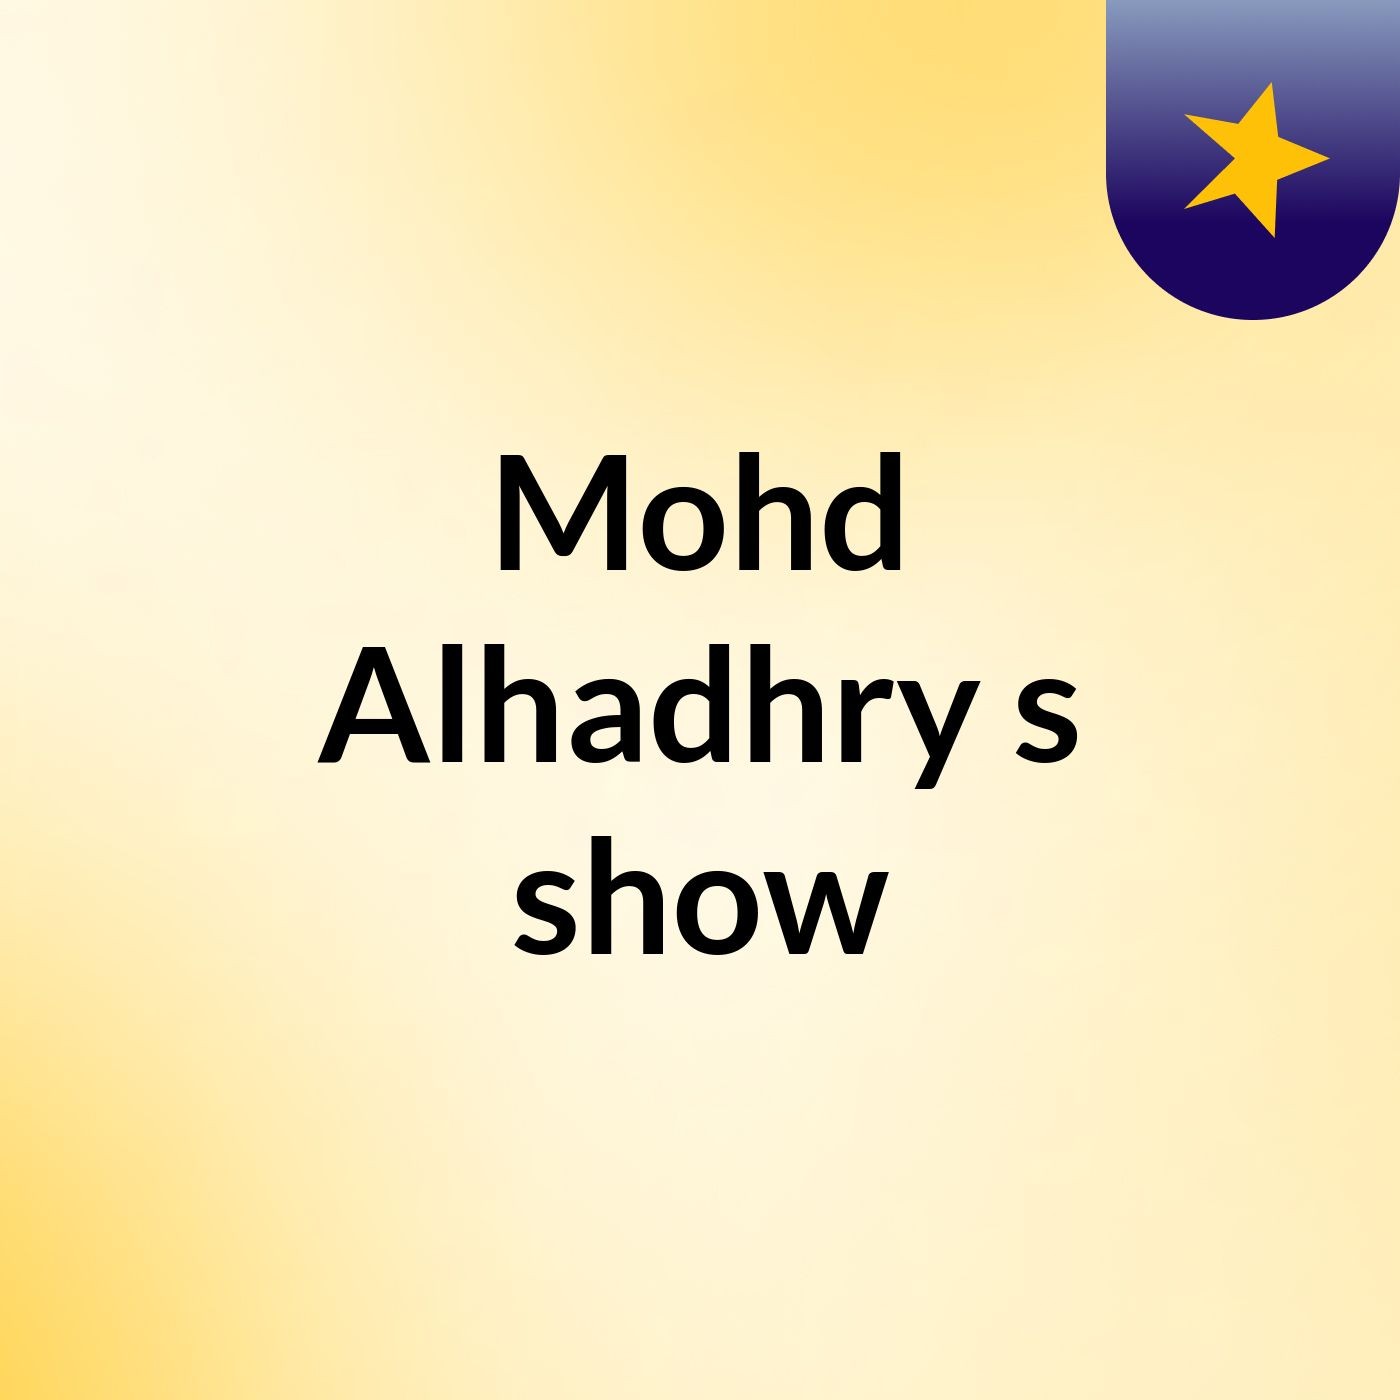 Mohd Alhadhry's show